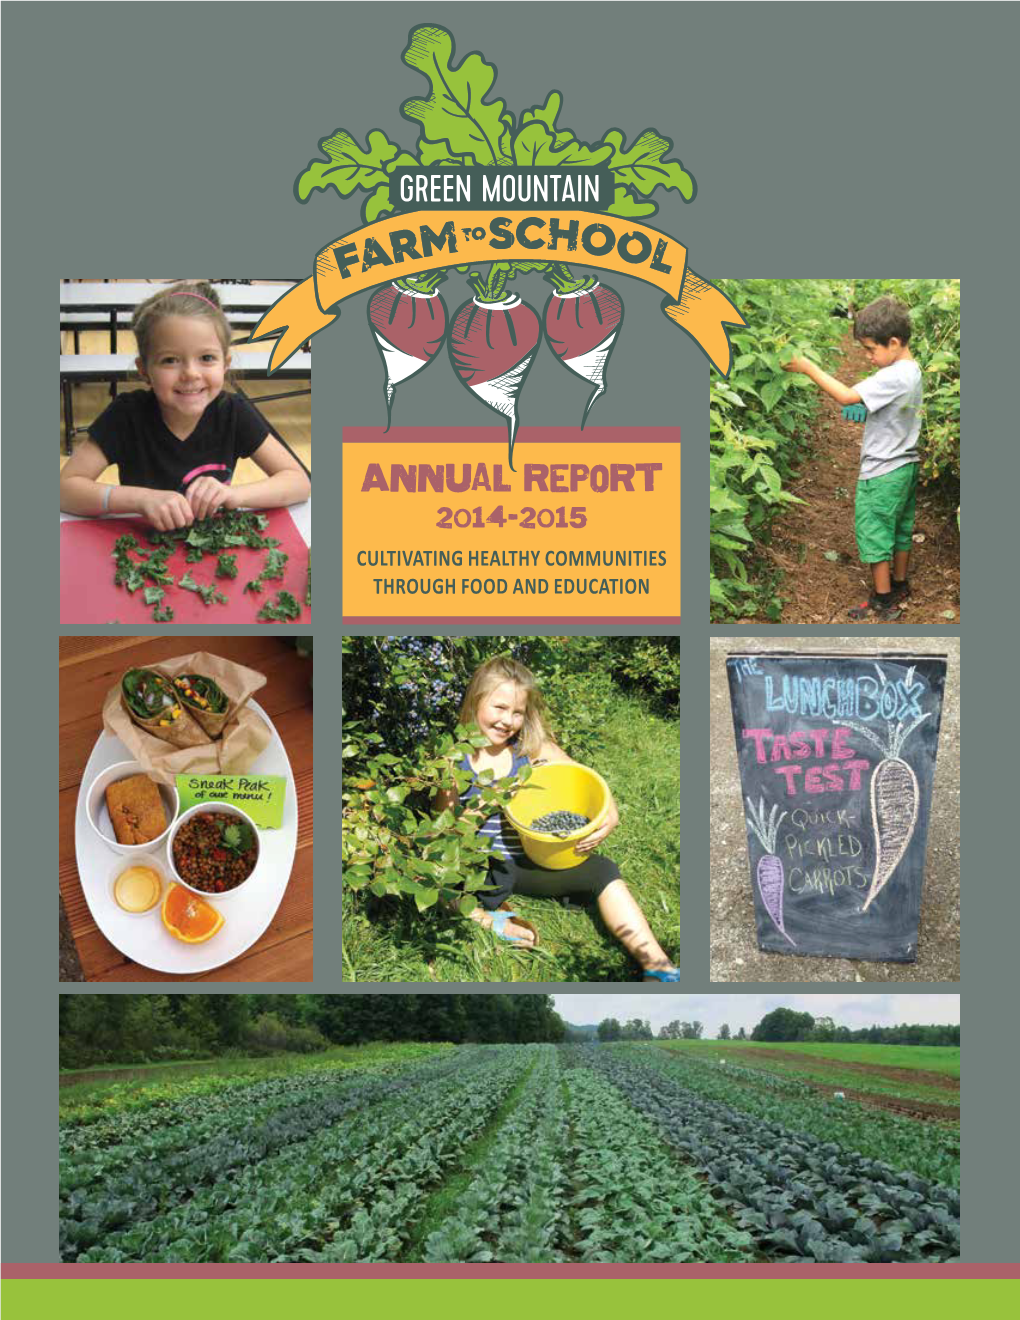 Annual Report 2014-2015 CULTIVATING HEALTHY COMMUNITIES THROUGH FOOD and EDUCATION